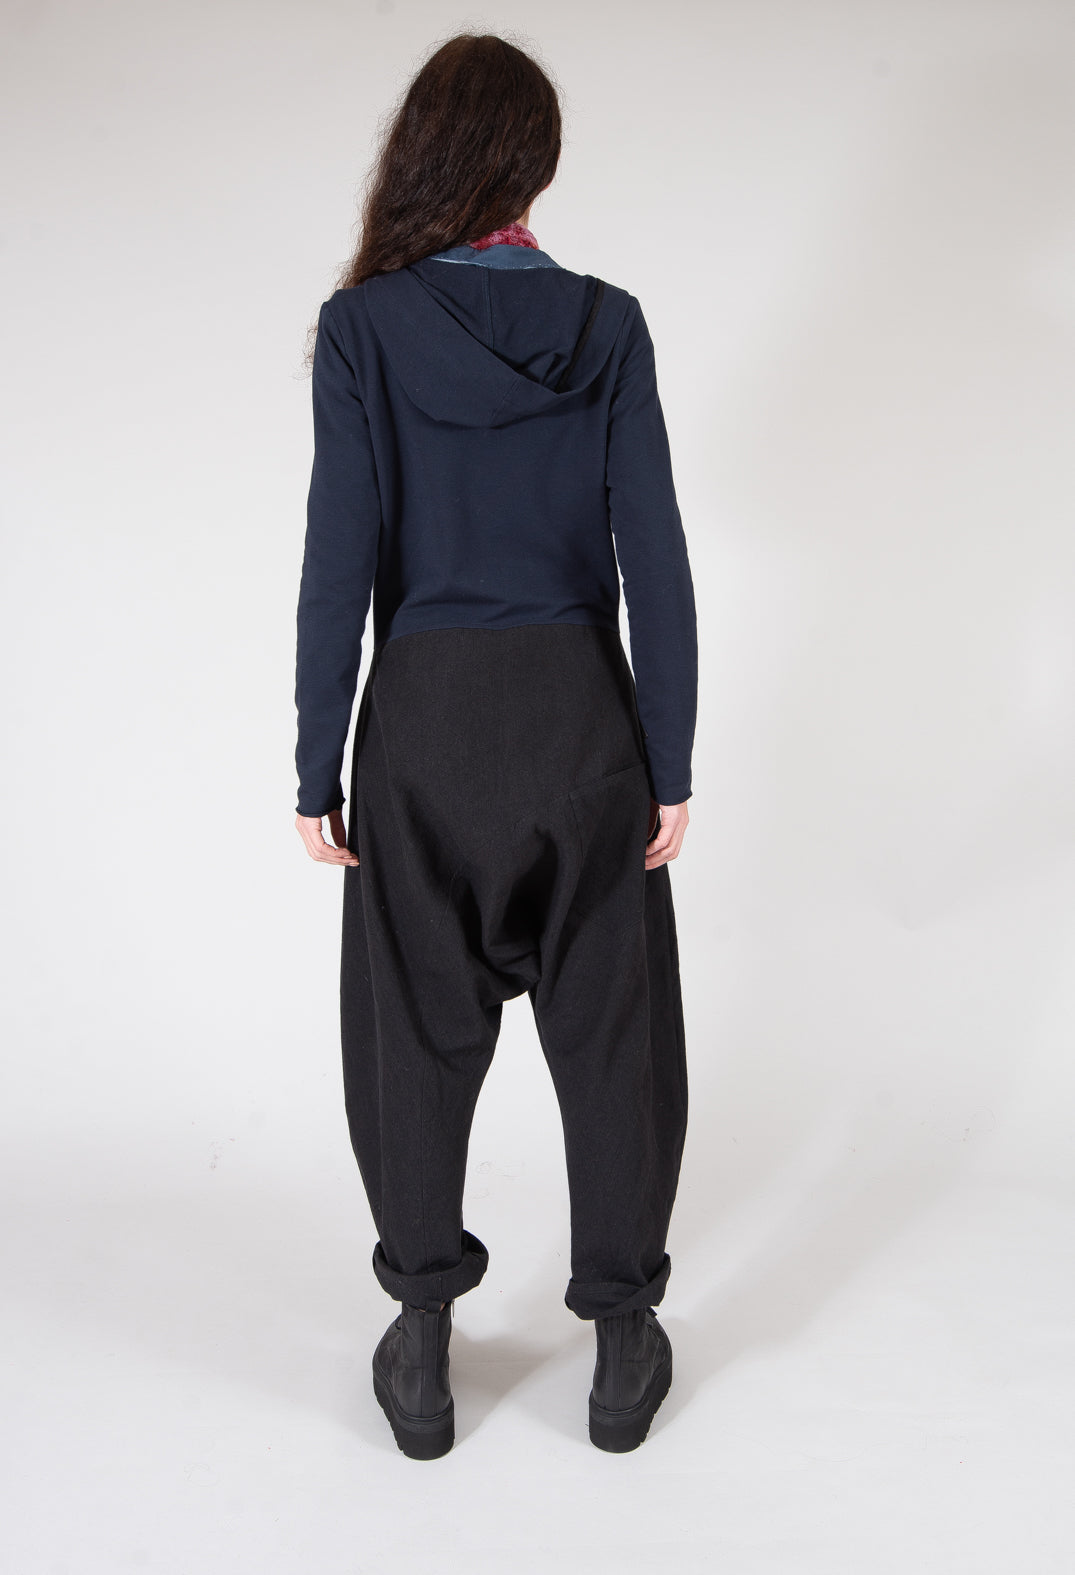 Dropcrotch Jumpsuit with Contrasting Fabric in Navy and Black